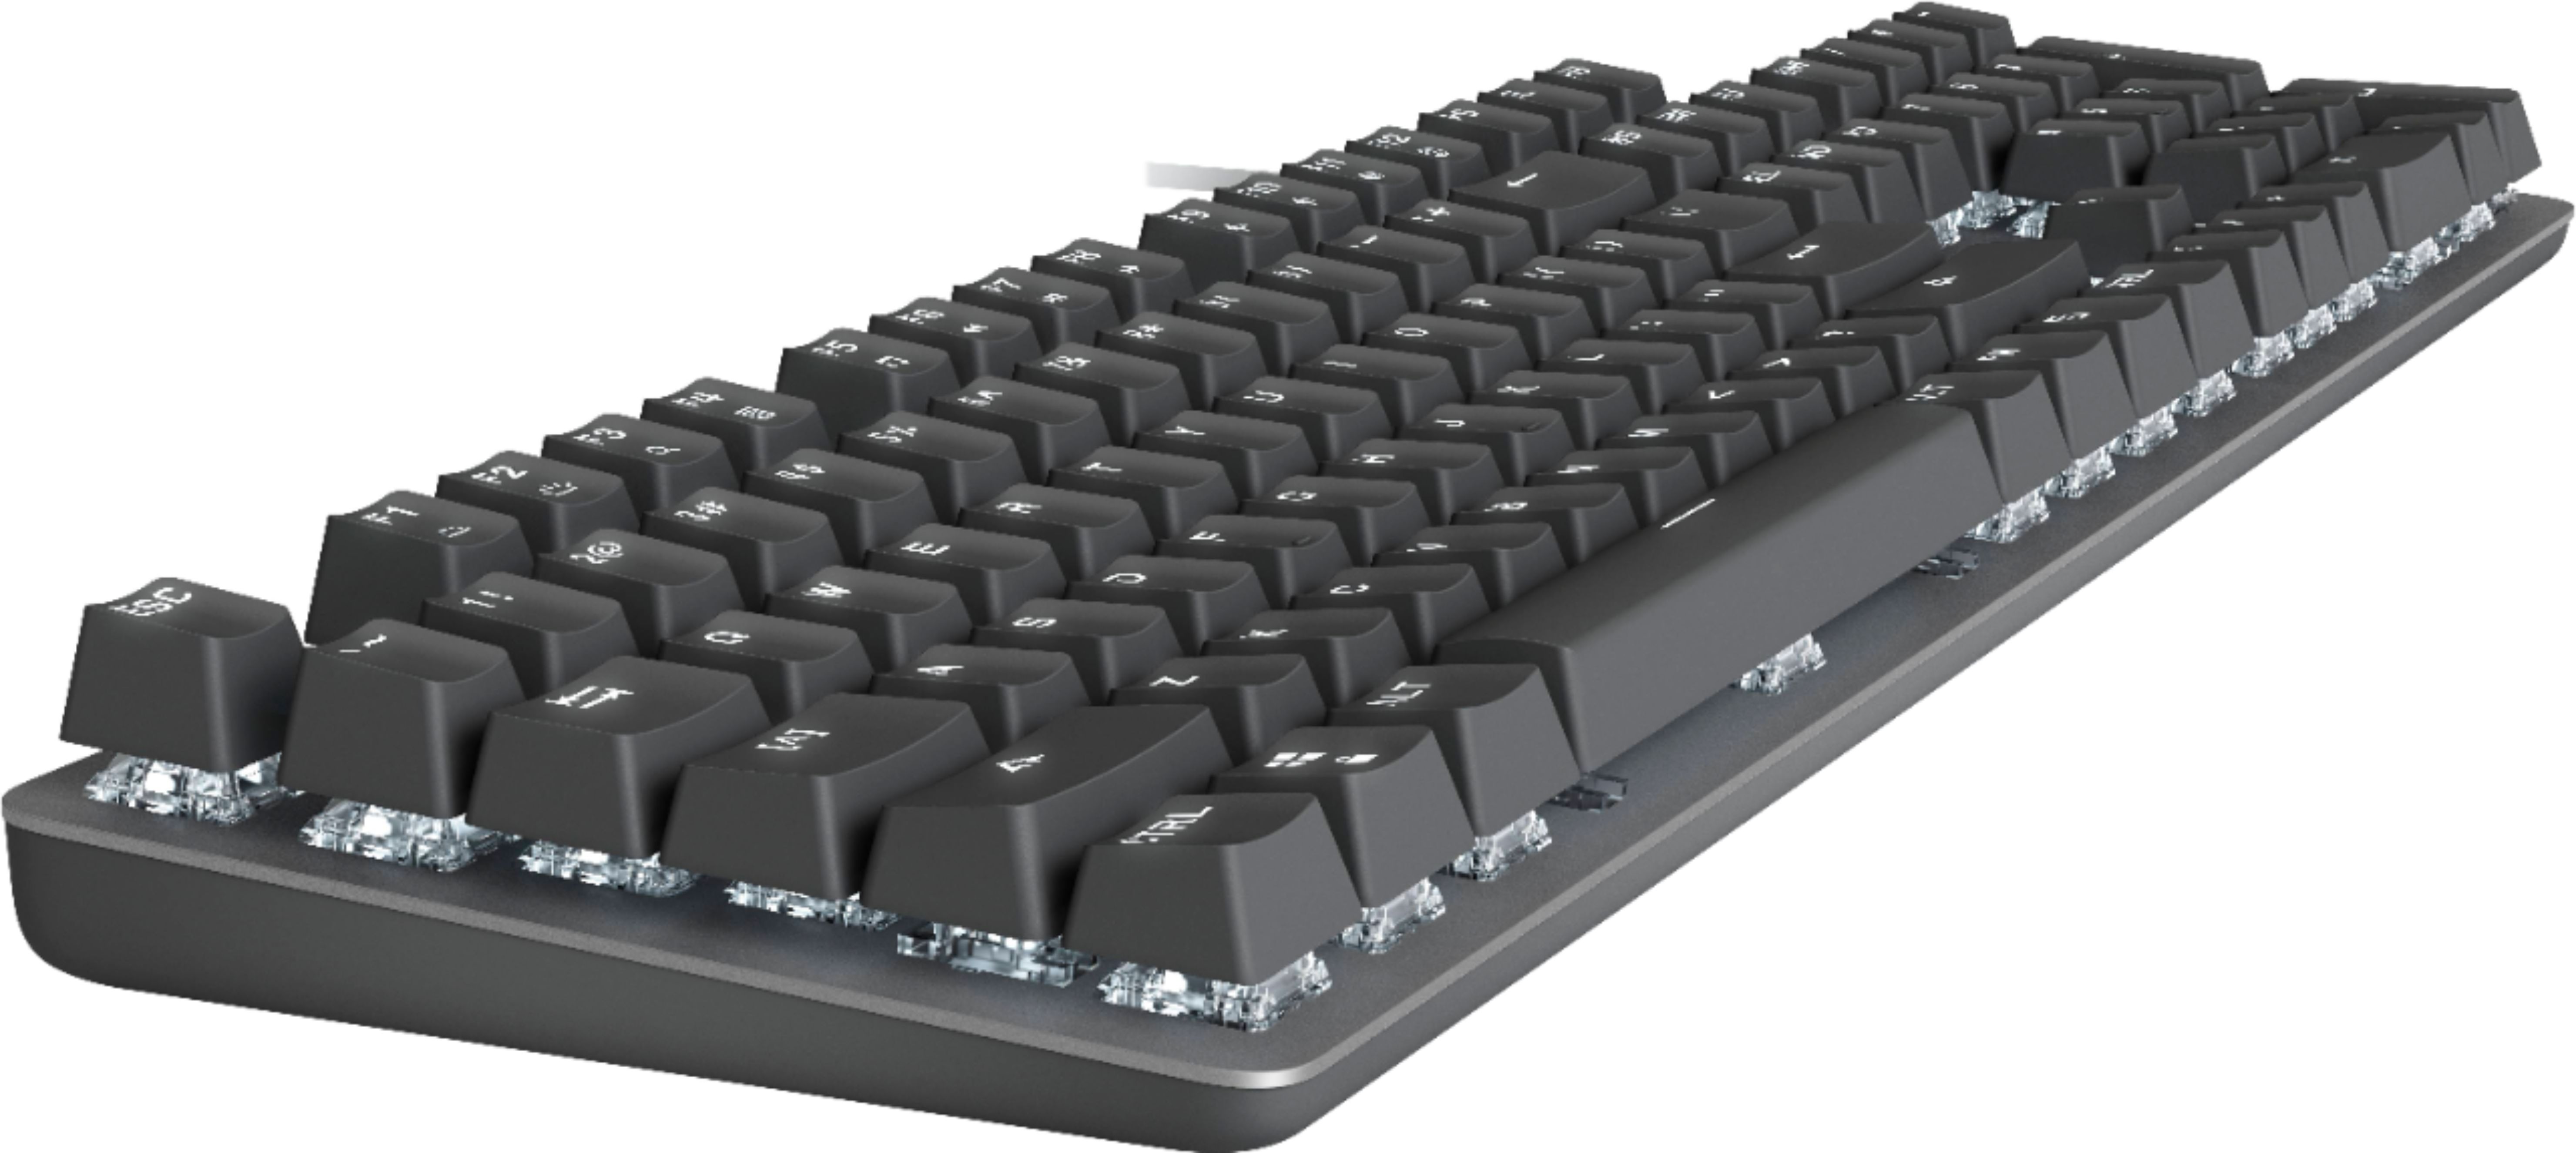 Angle View: Logitech - K845 Full-size Wired Mechanical Cherry MX Blue Clicky Switch Keyboard with Five Backlight Modes - Graphite